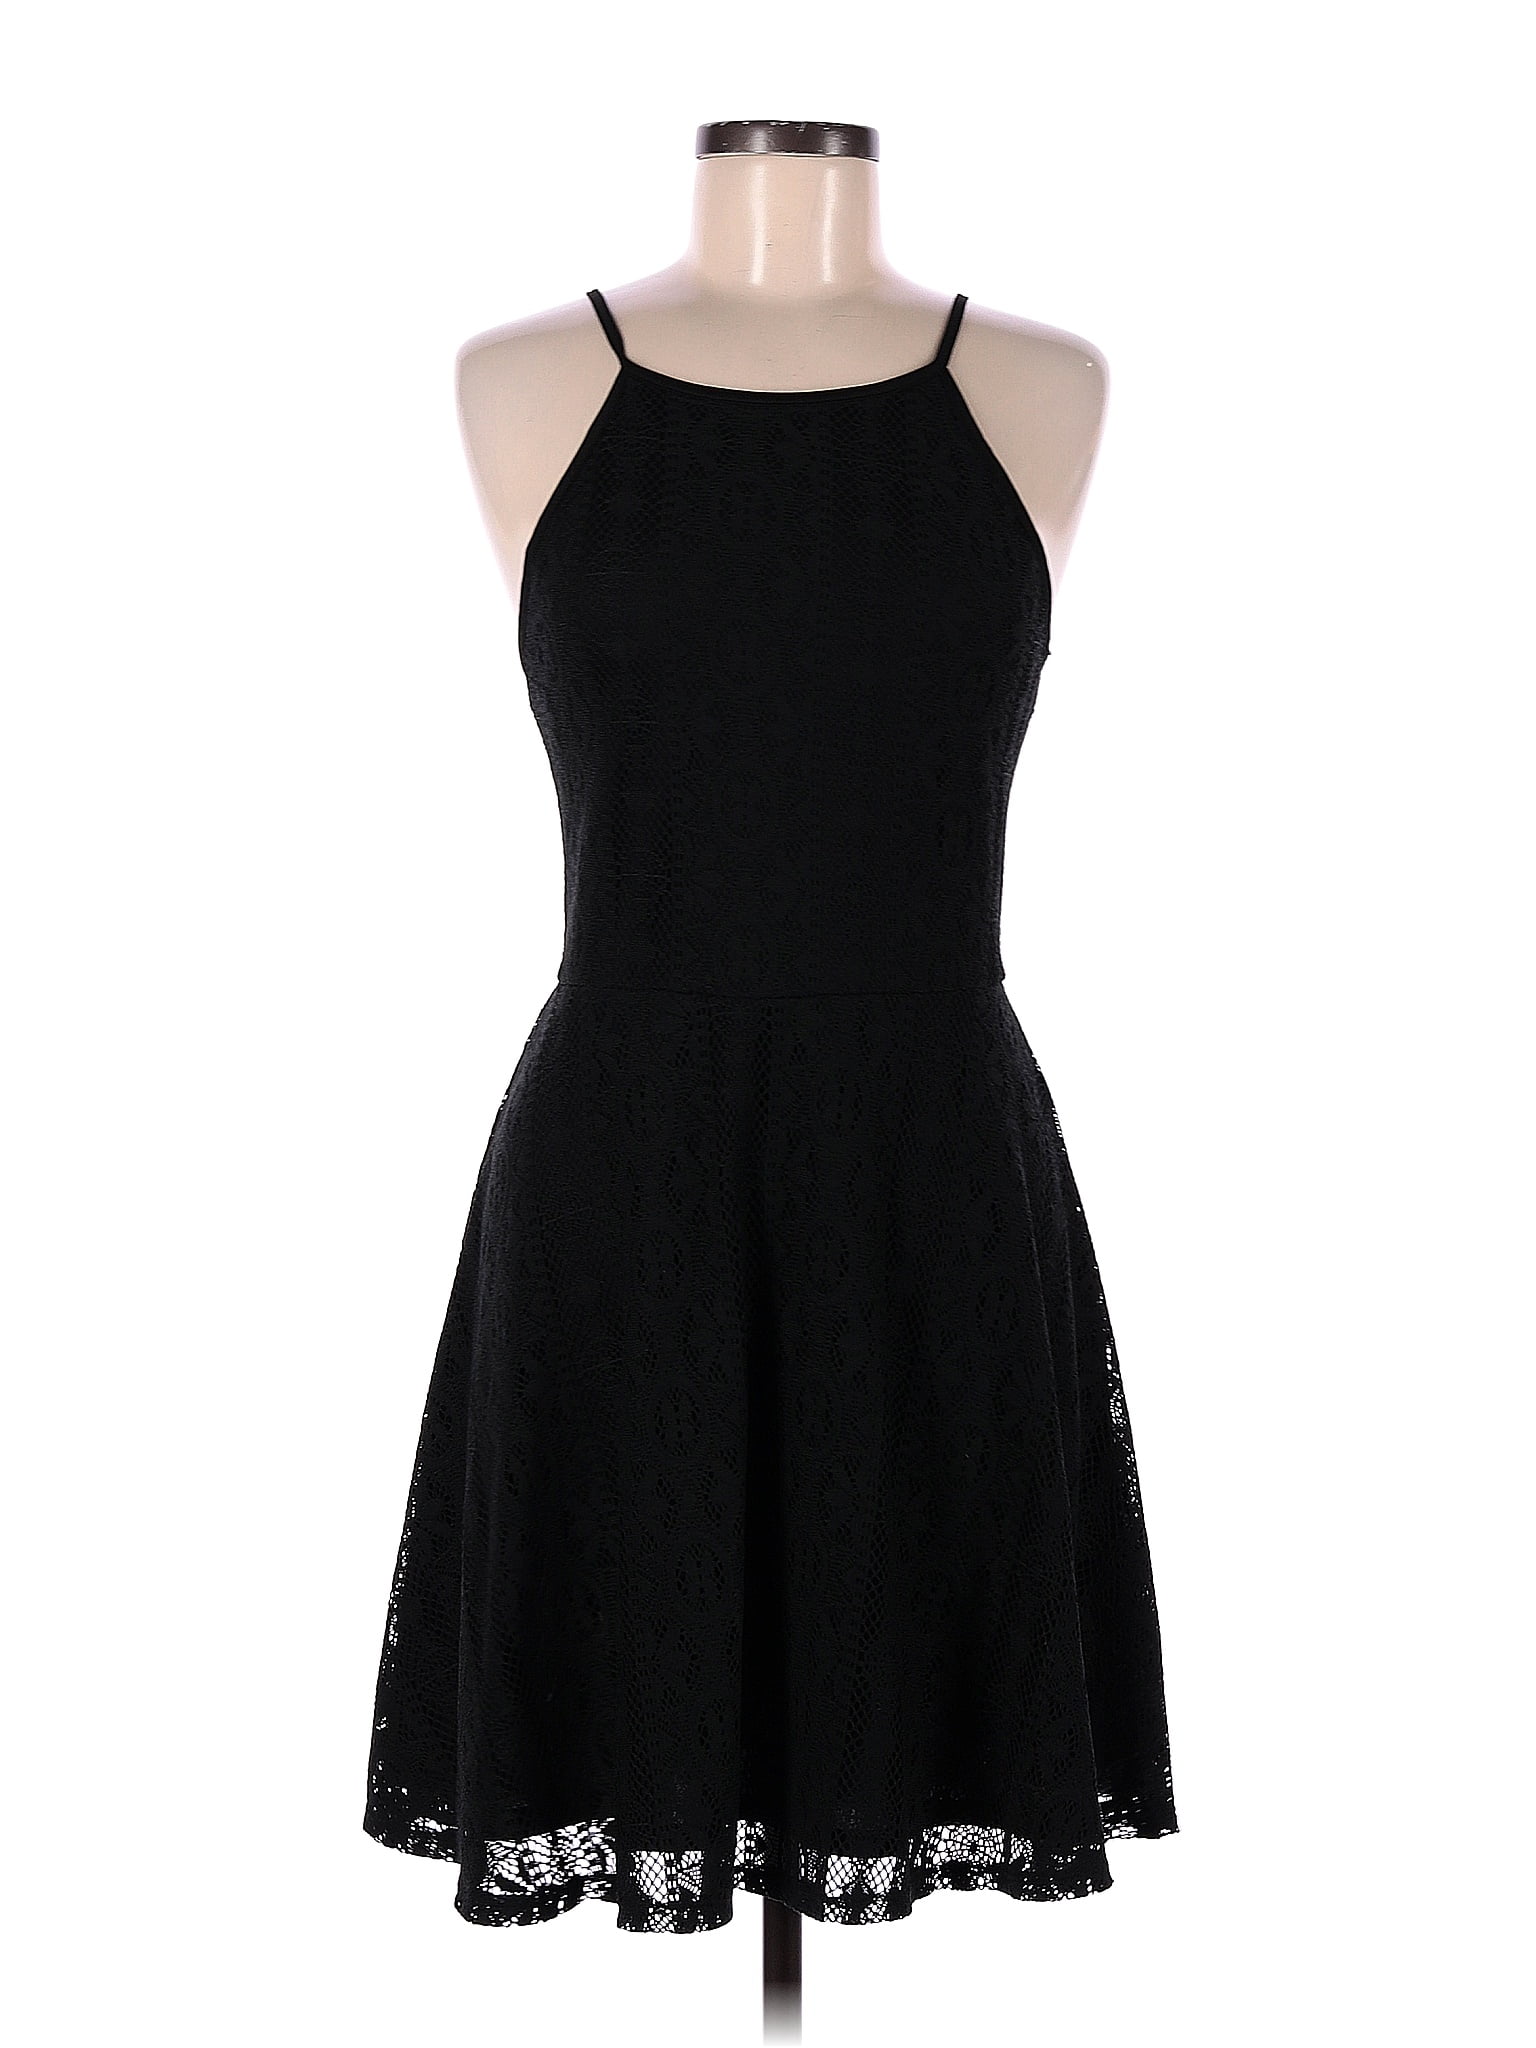 Mossimo Supply Co. 100% Polyester Solid Black Casual Dress Size M